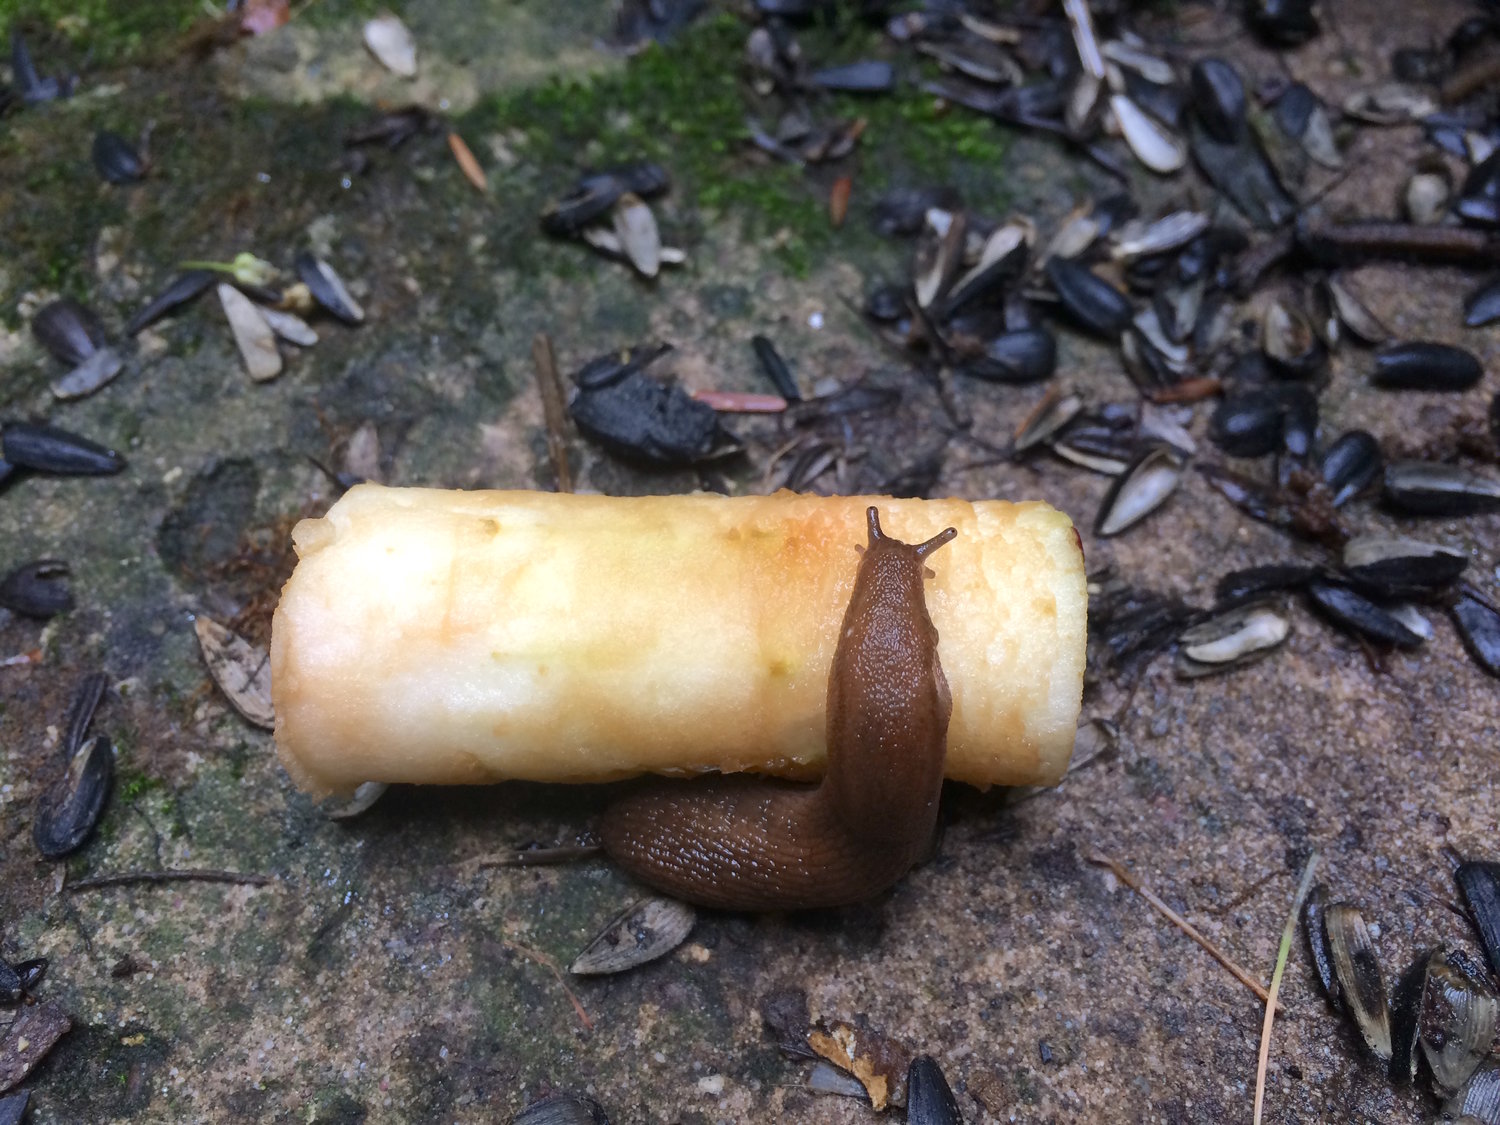 Don’t be afraid to feed a slug. You’ll find their gratitude refreshing and get a closeup view of the “teeth” you never knew they had—a finely-toothed structure called a radula.